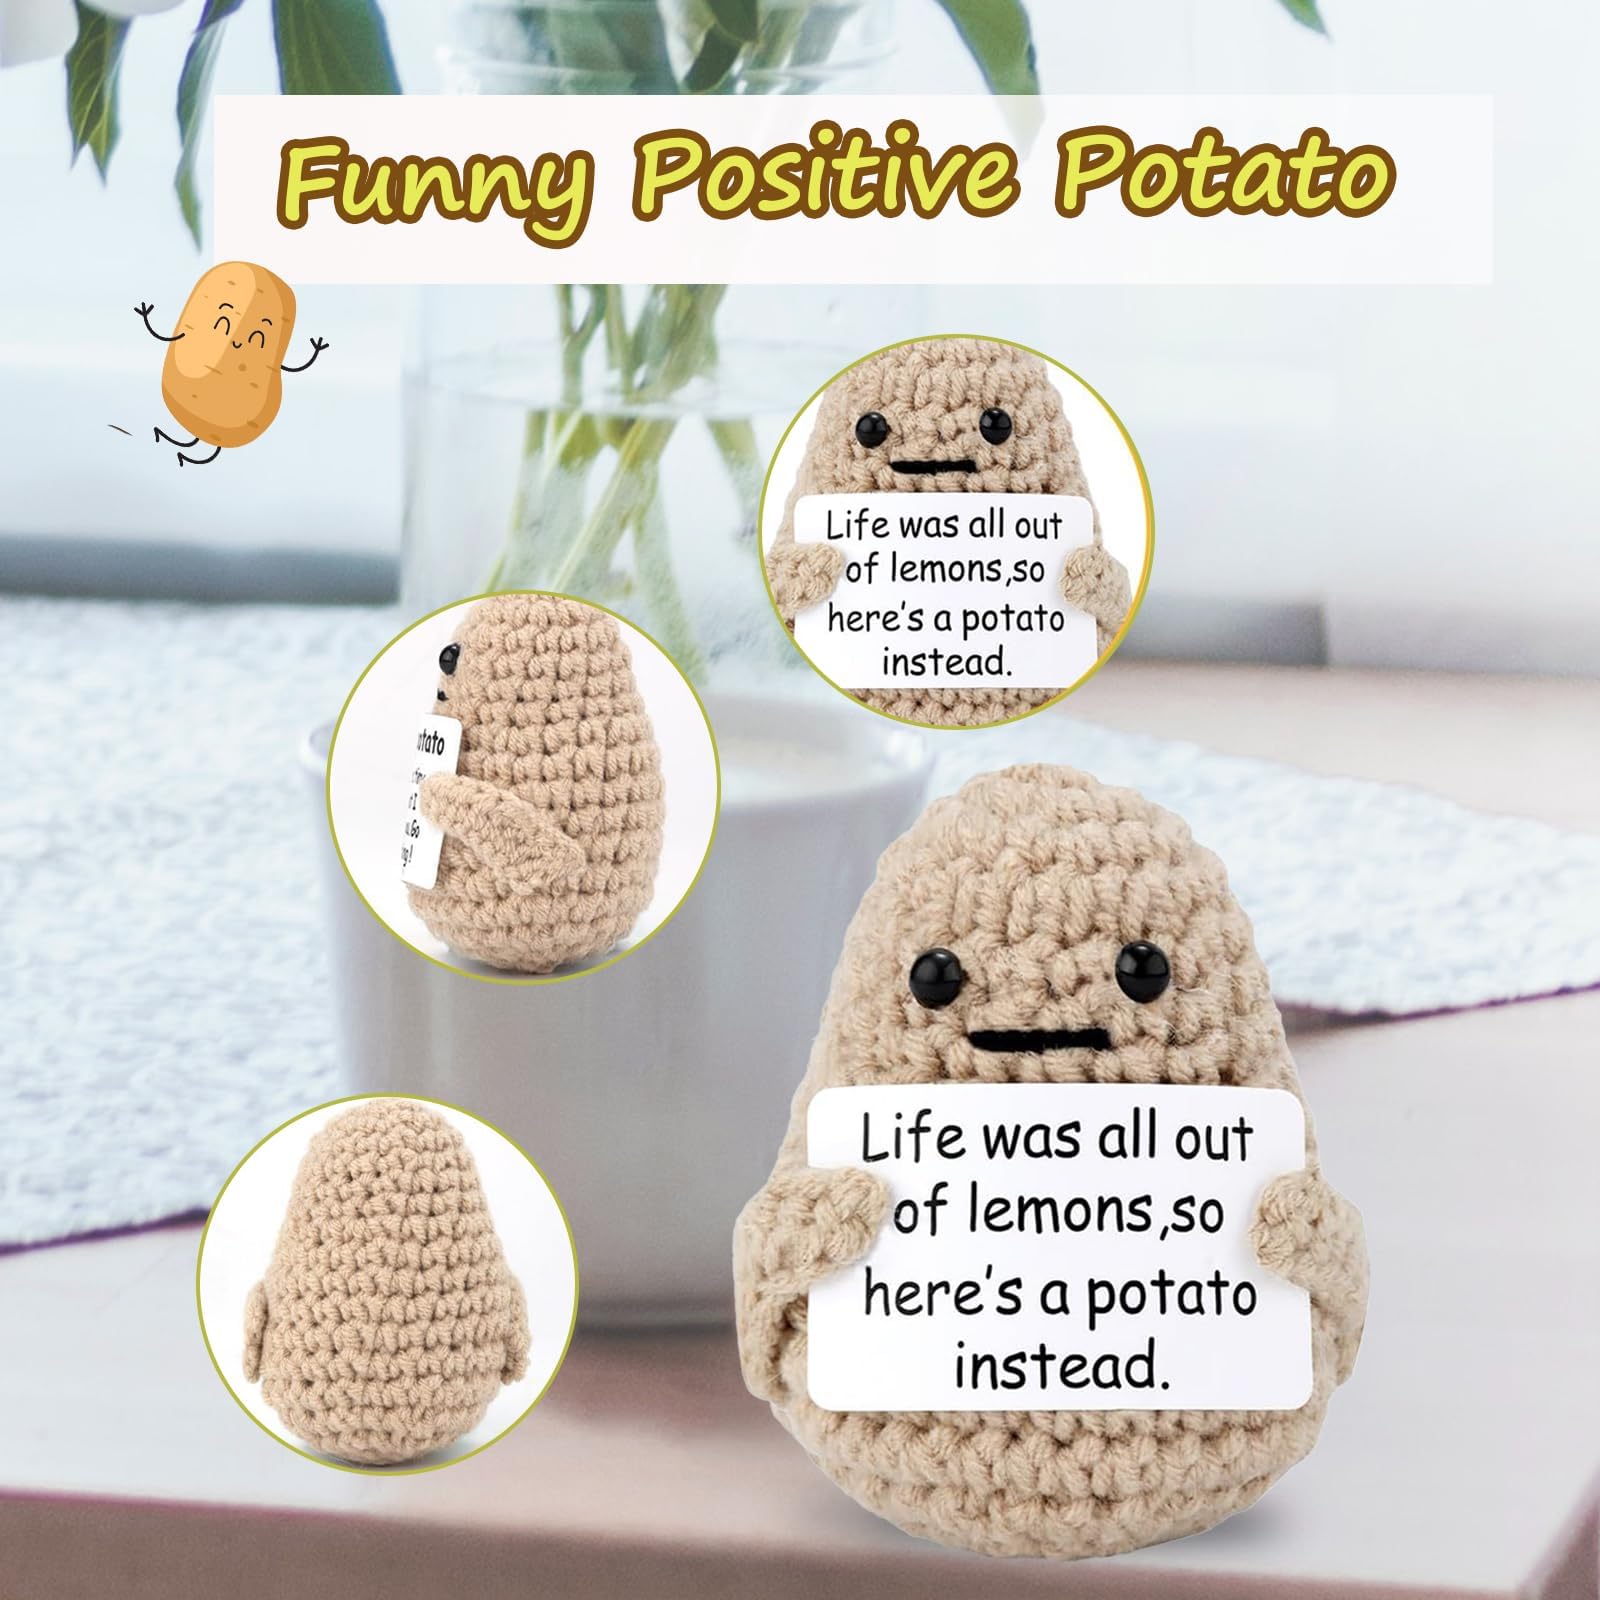 POSITIVE POTATO, 3 inch Mini Funny Knitted Wool Potato Toy with